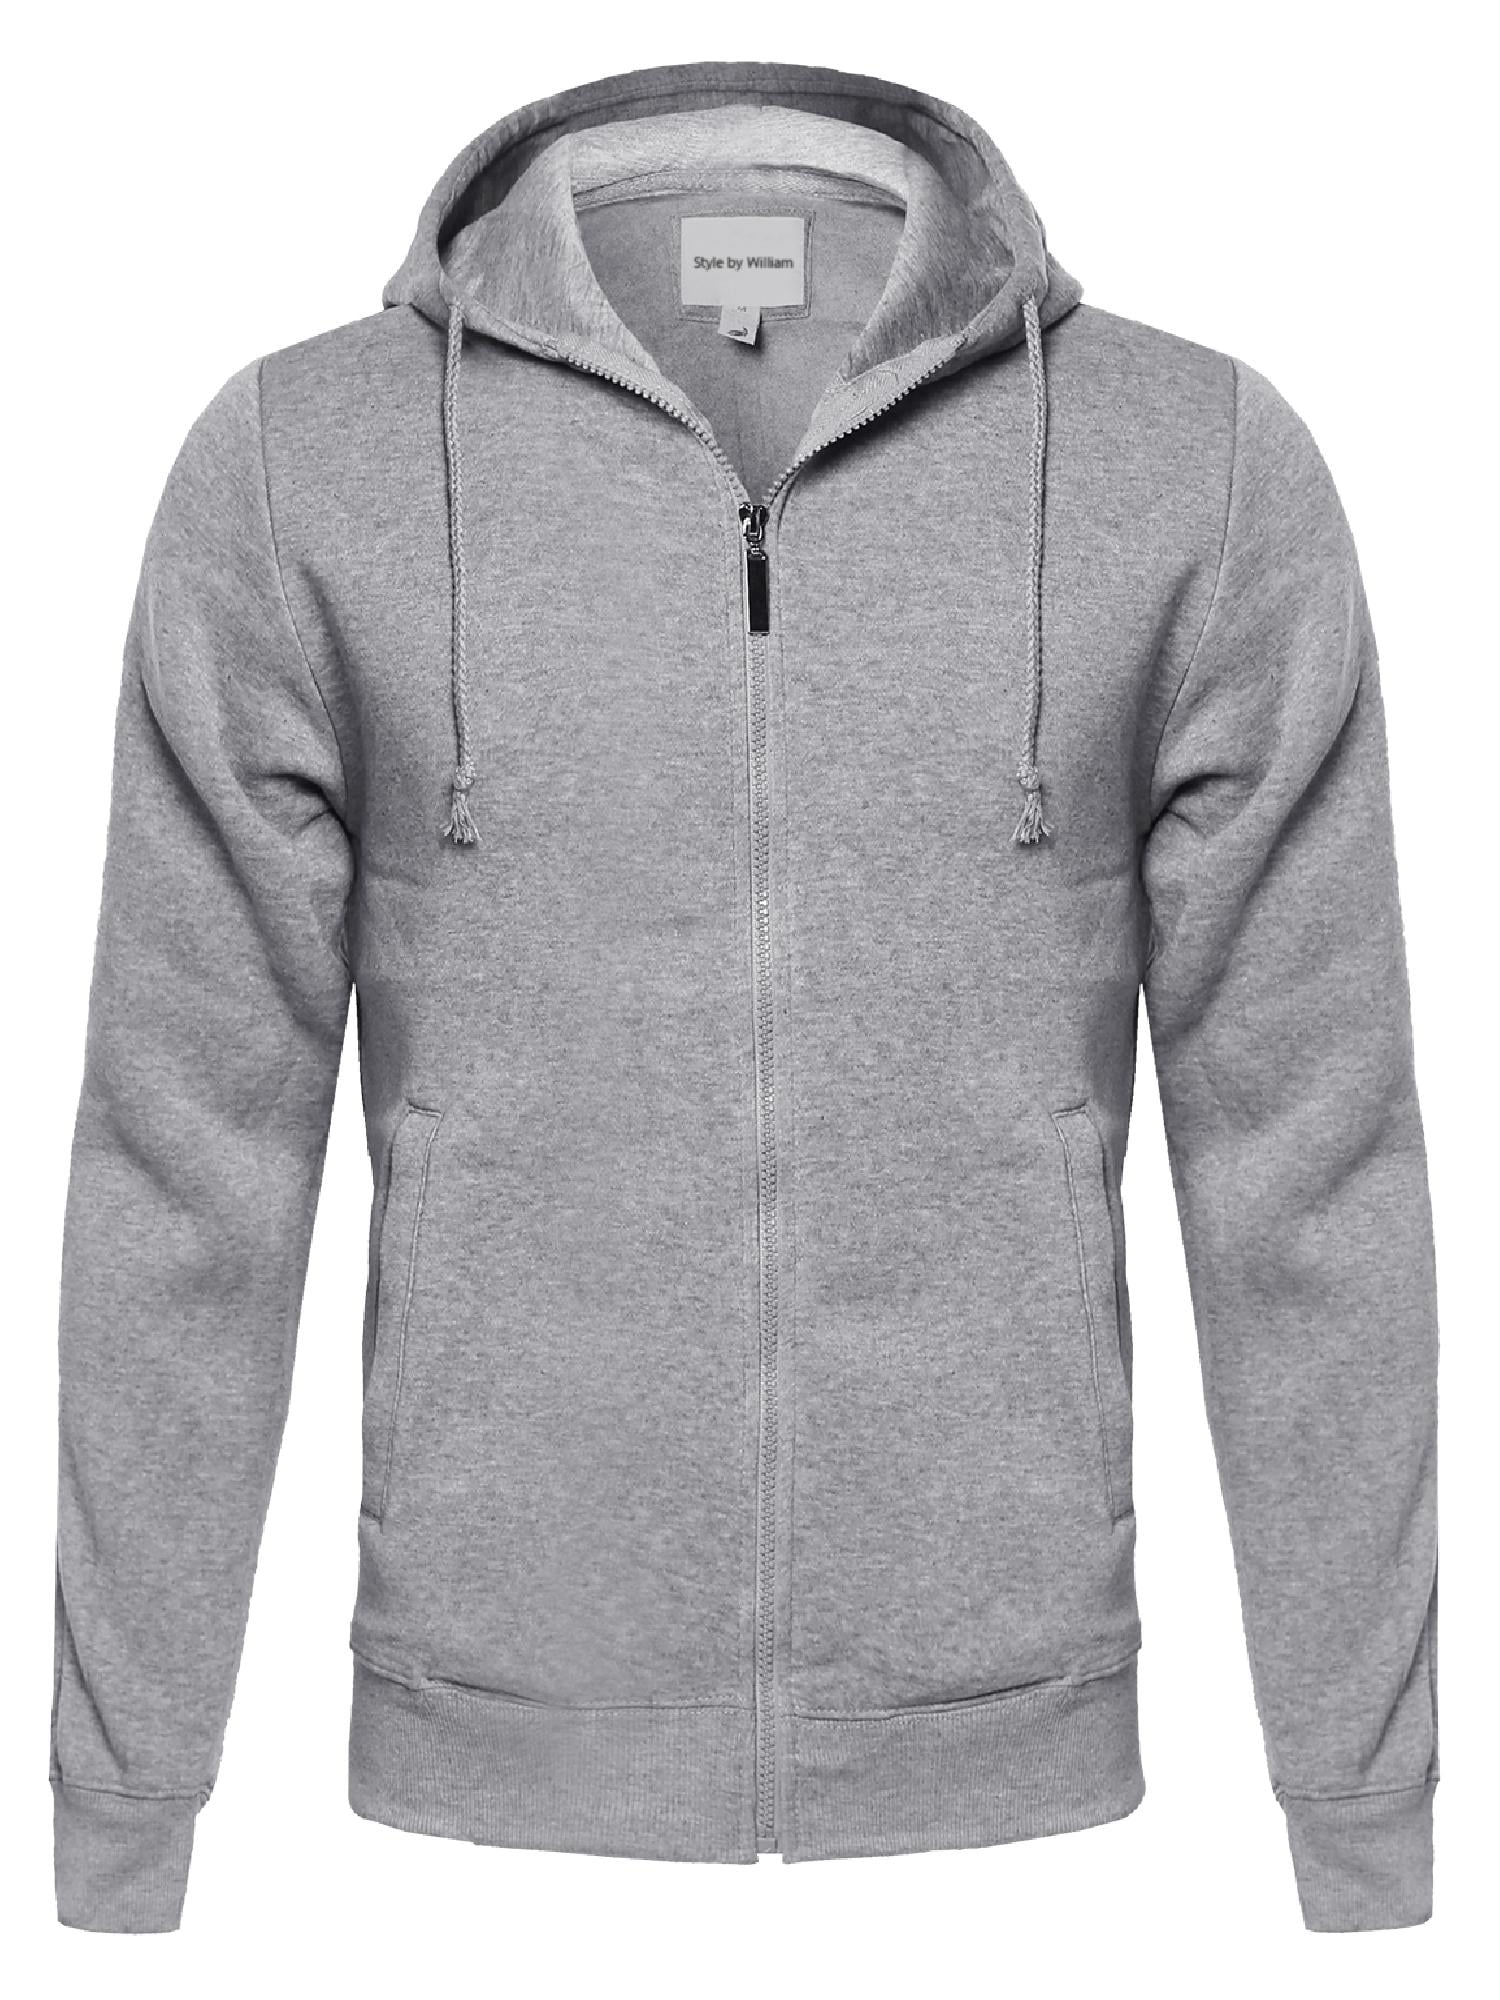 FashionOutfit Men's Basic High Neck Fleece Hoodie With Stripe Details ...